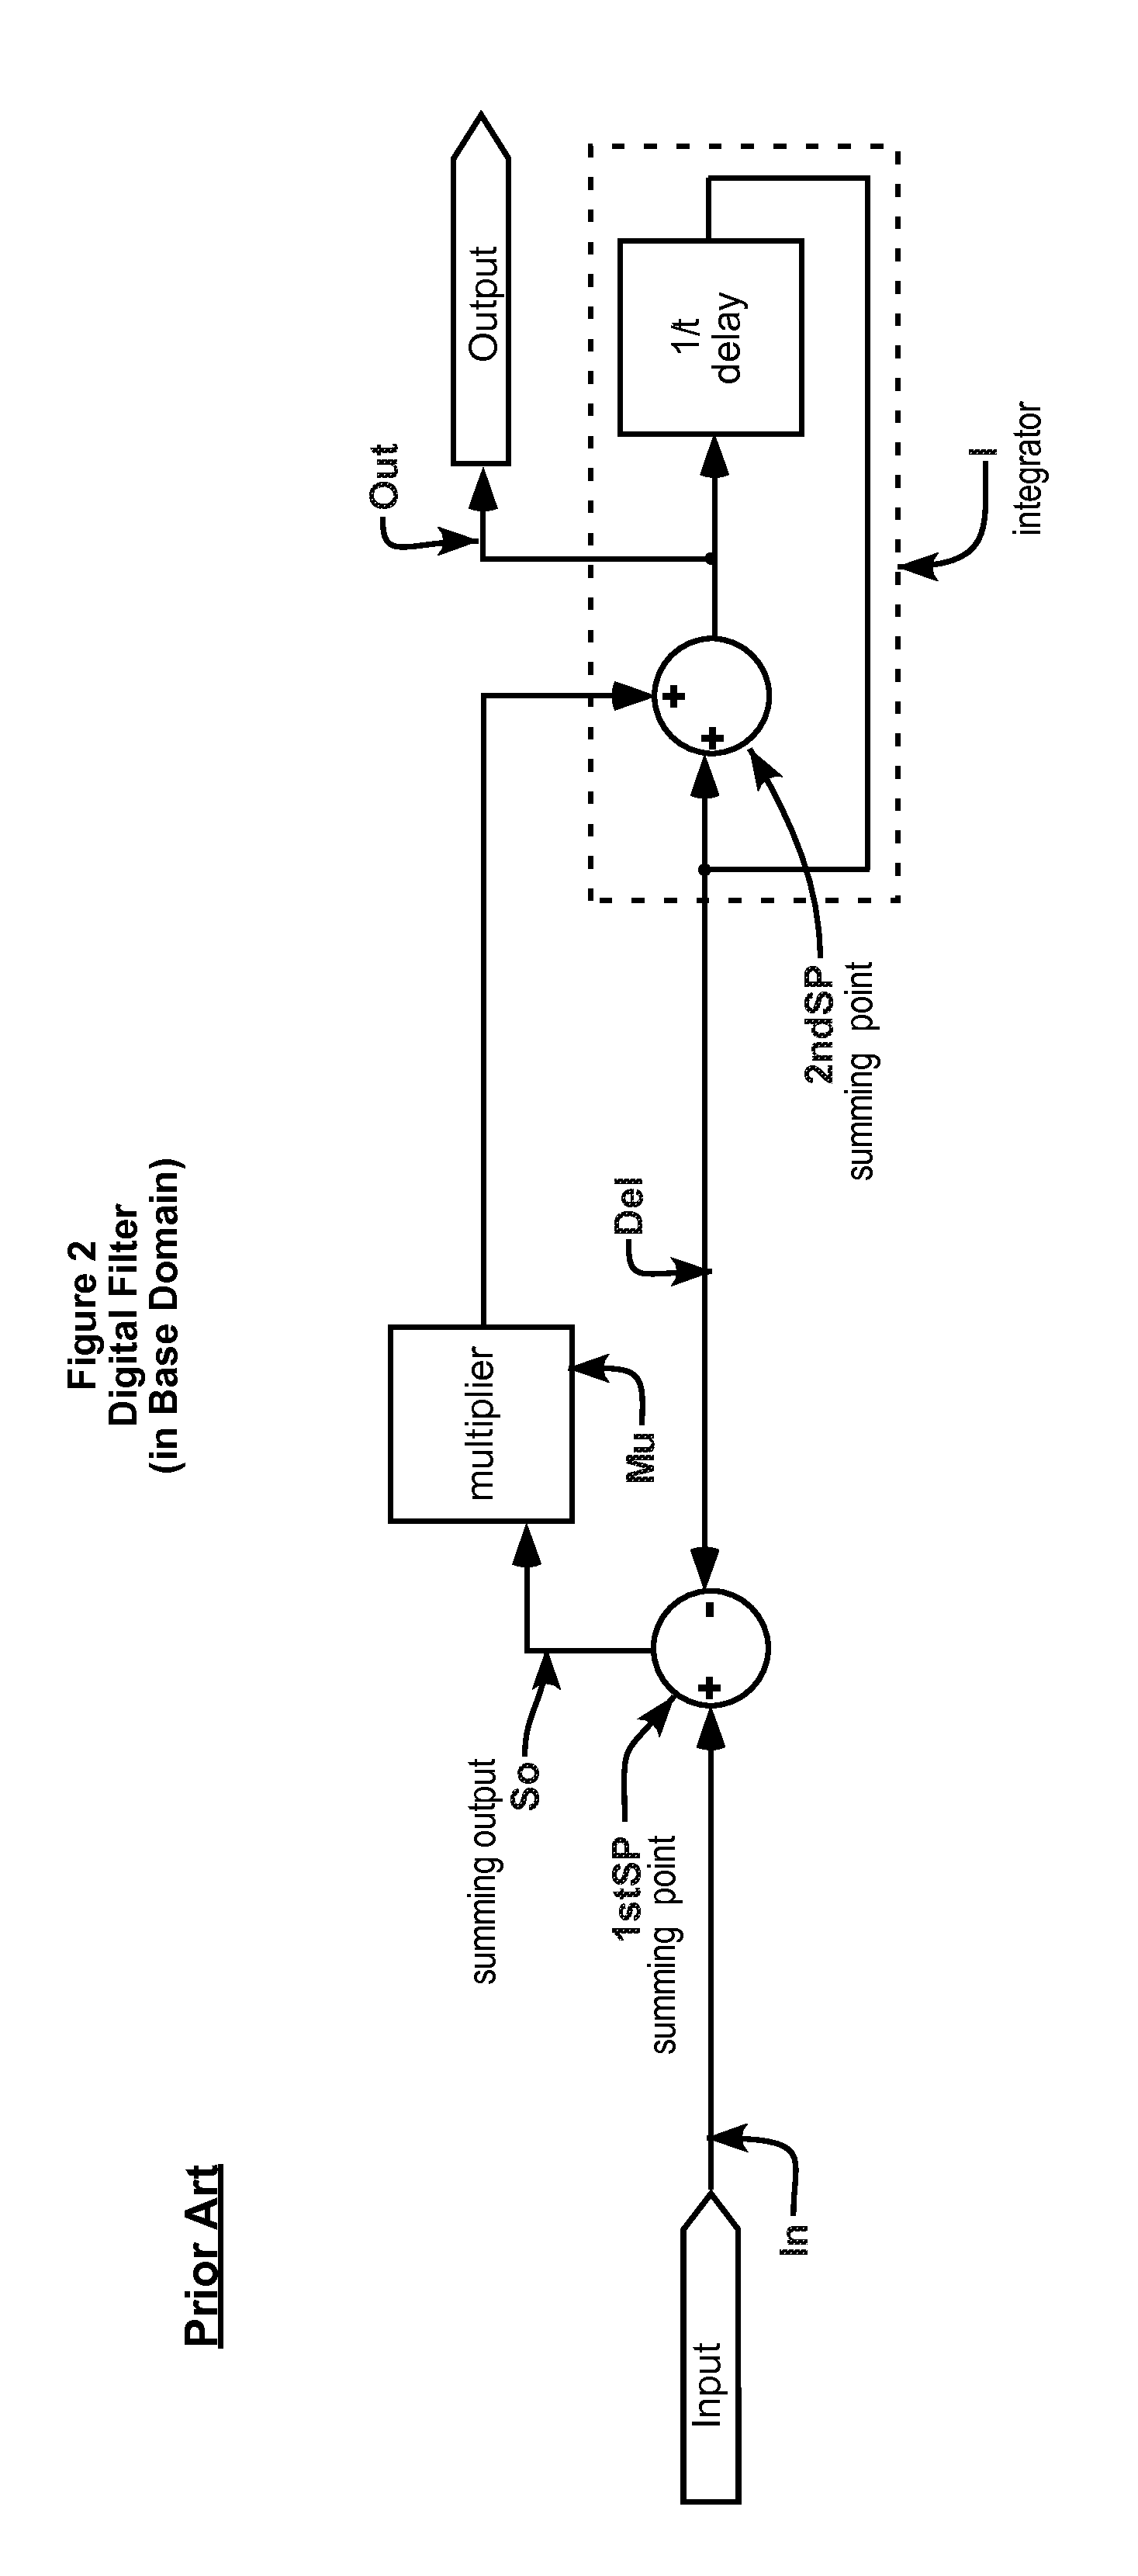 Variable exponent averaging detector and dynamic range controller